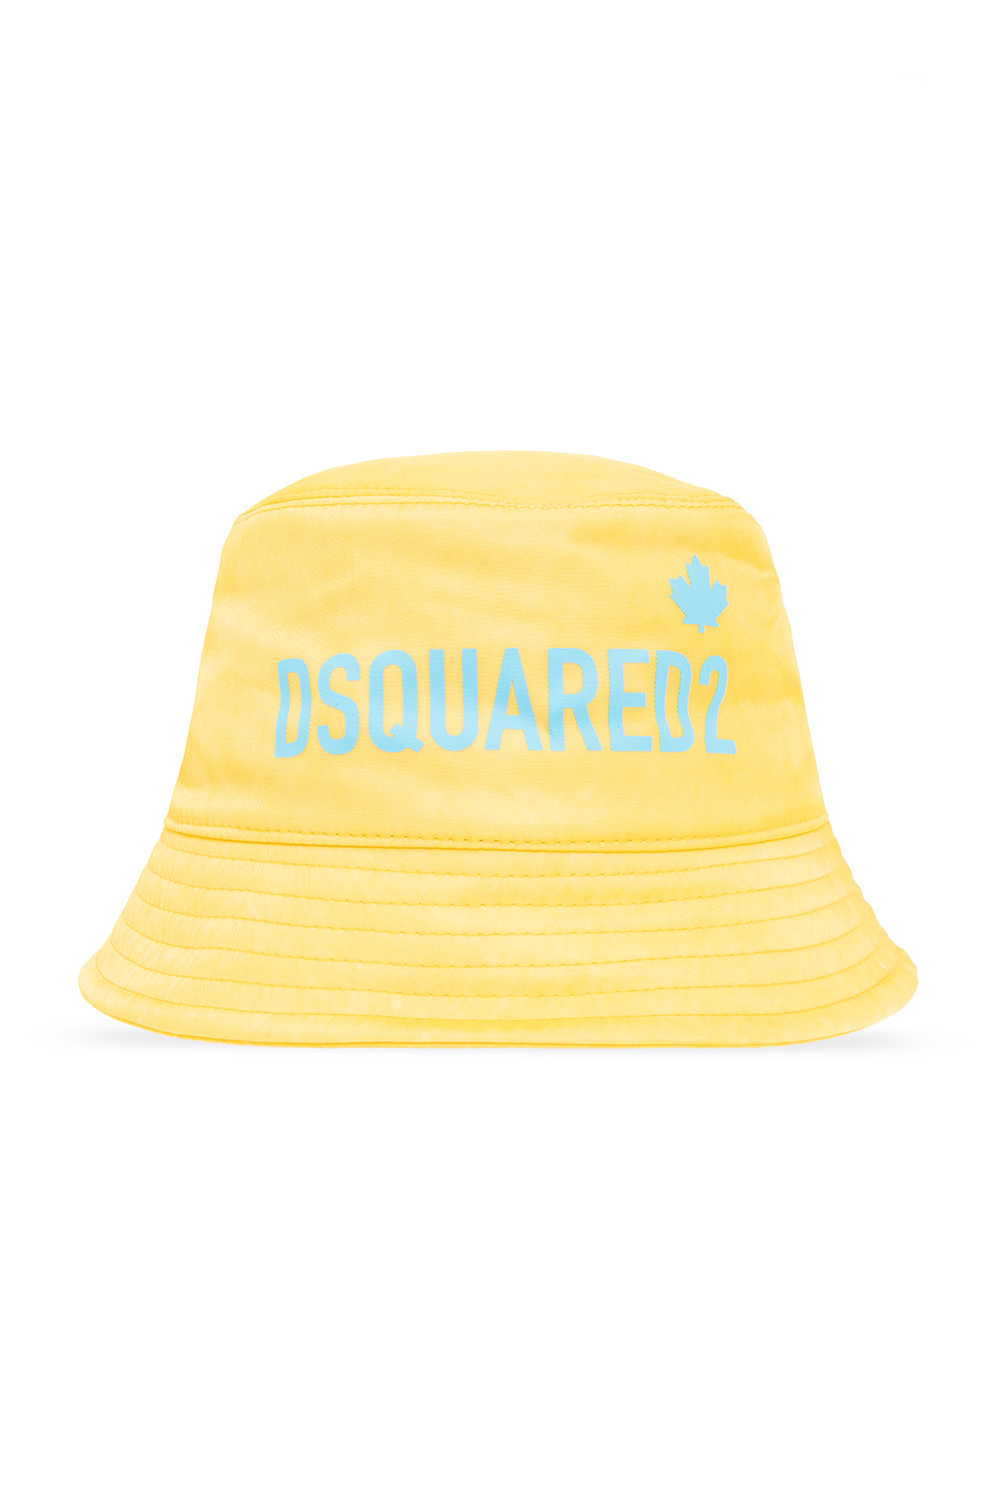 Dsquared2 ‘One Life One Planet’ collection bucket Storm hat